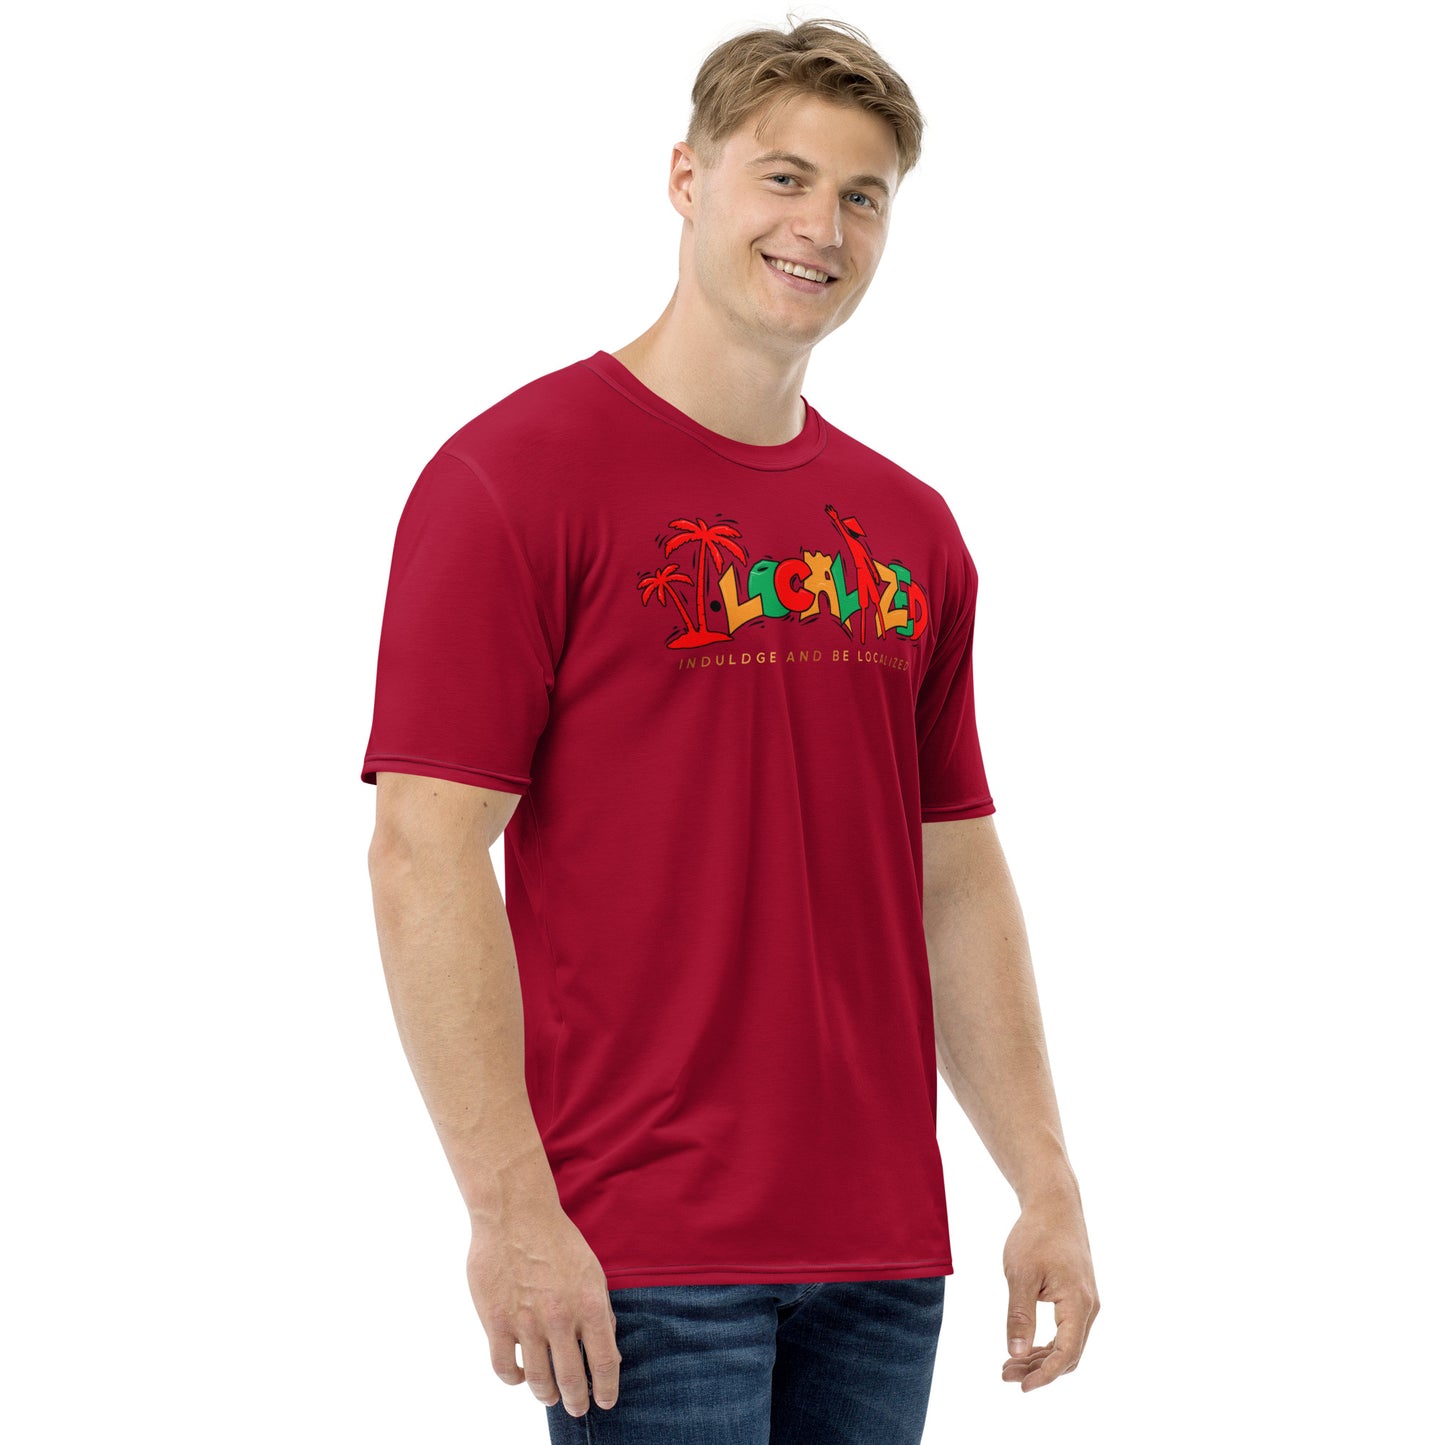 Maroon V.Localized (Ice/Gold/Green) Men’s Dry-Fit T-shirt